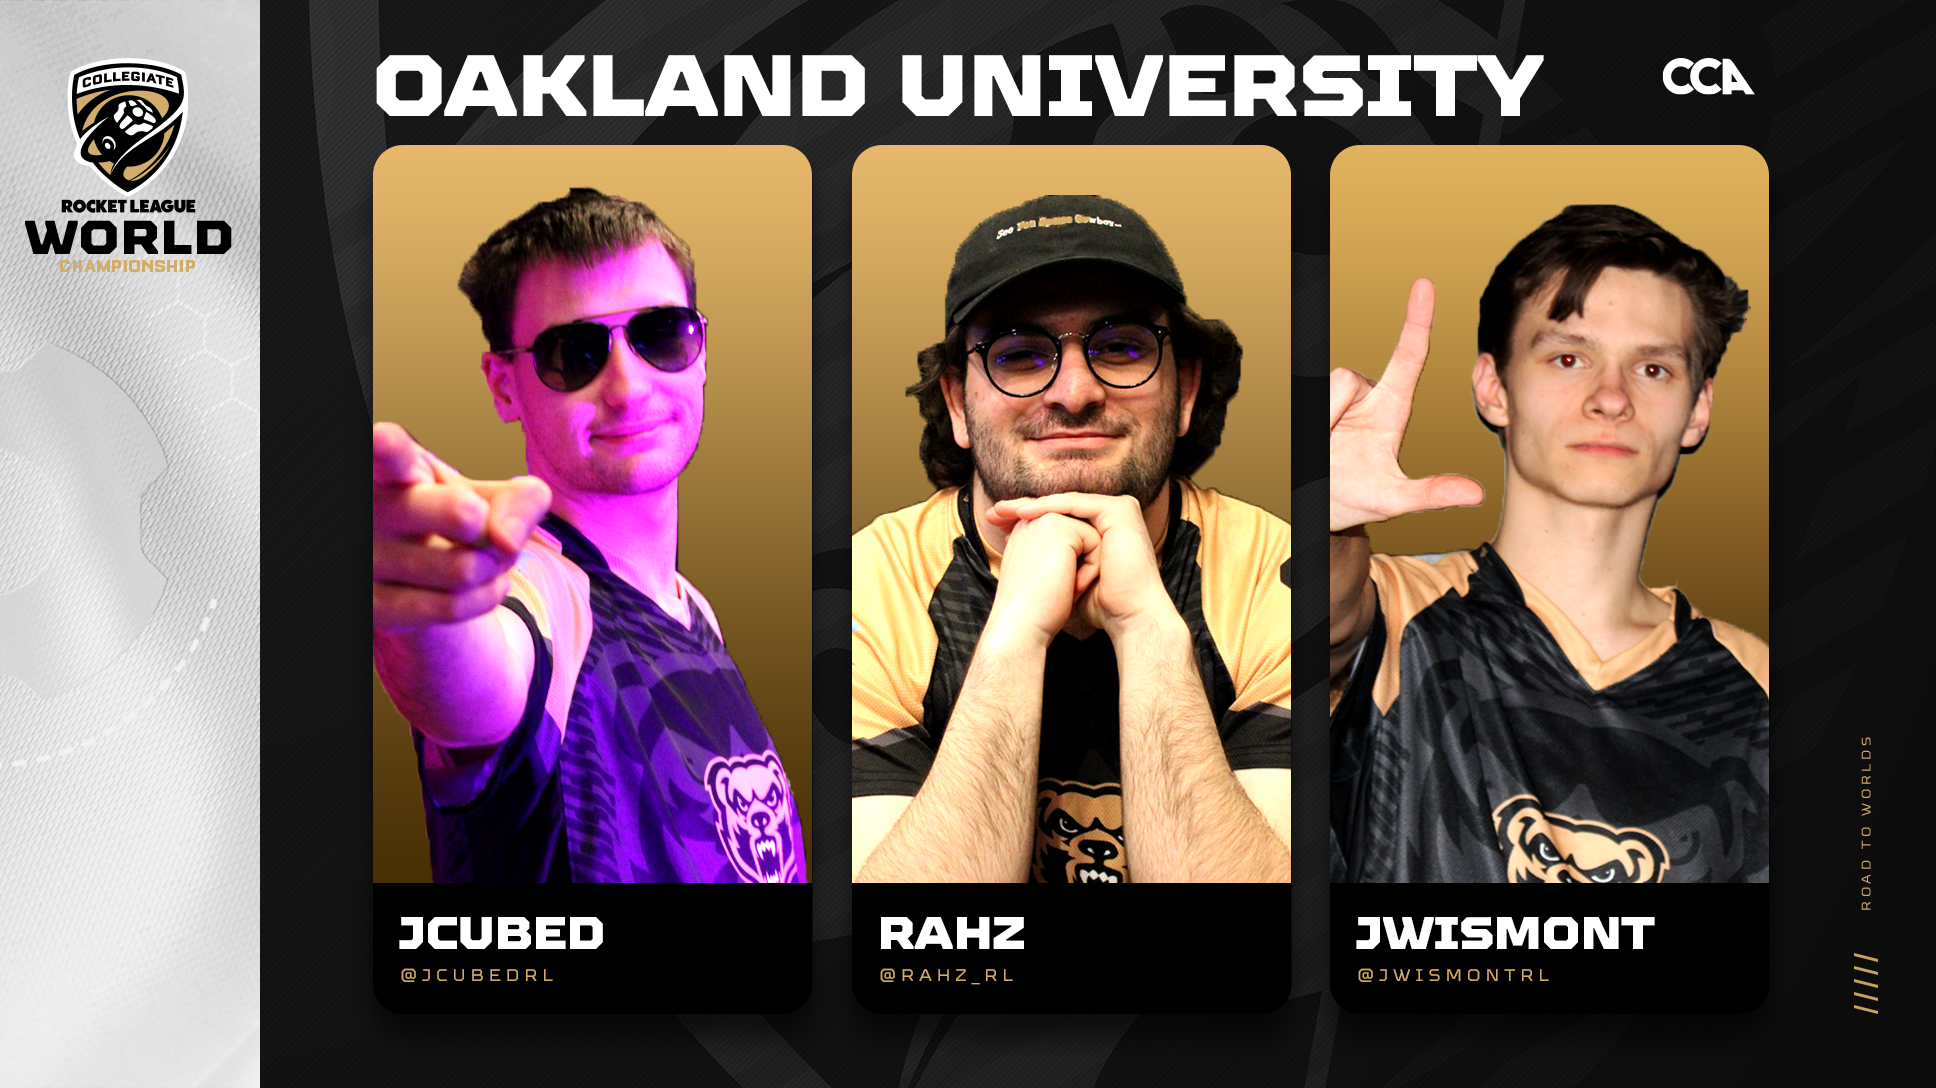 Oakland University Road to Worlds header with images of JCubed, Rahz, and JWismont